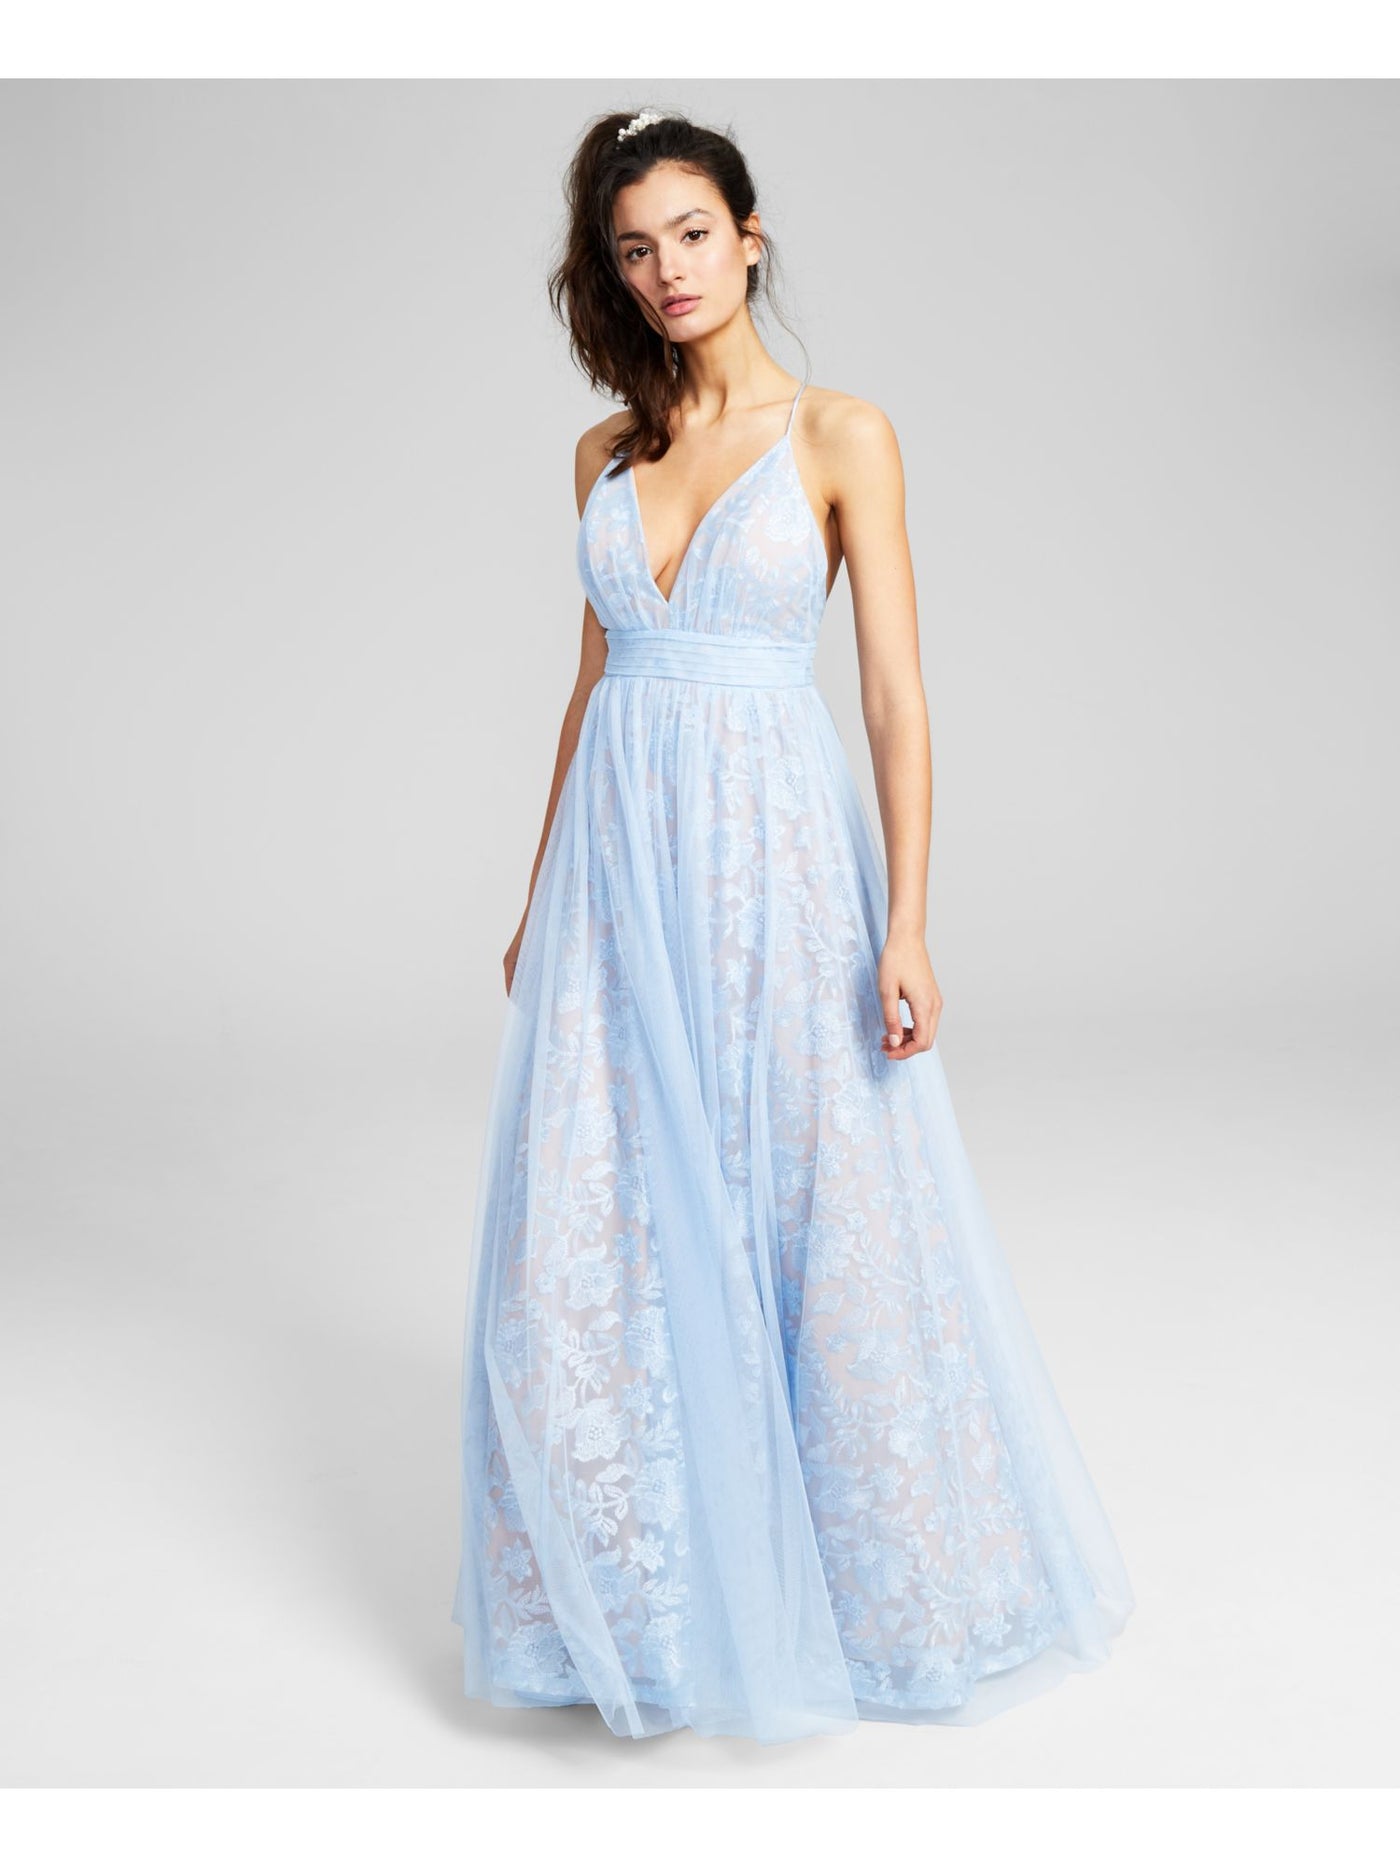 SAY YES TO THE PROM Womens Light Blue Embroidered Pleated Sheer Lace Layered Zippered Floral Spaghetti Strap V Neck Full-Length Evening Gown Dress Juniors 9